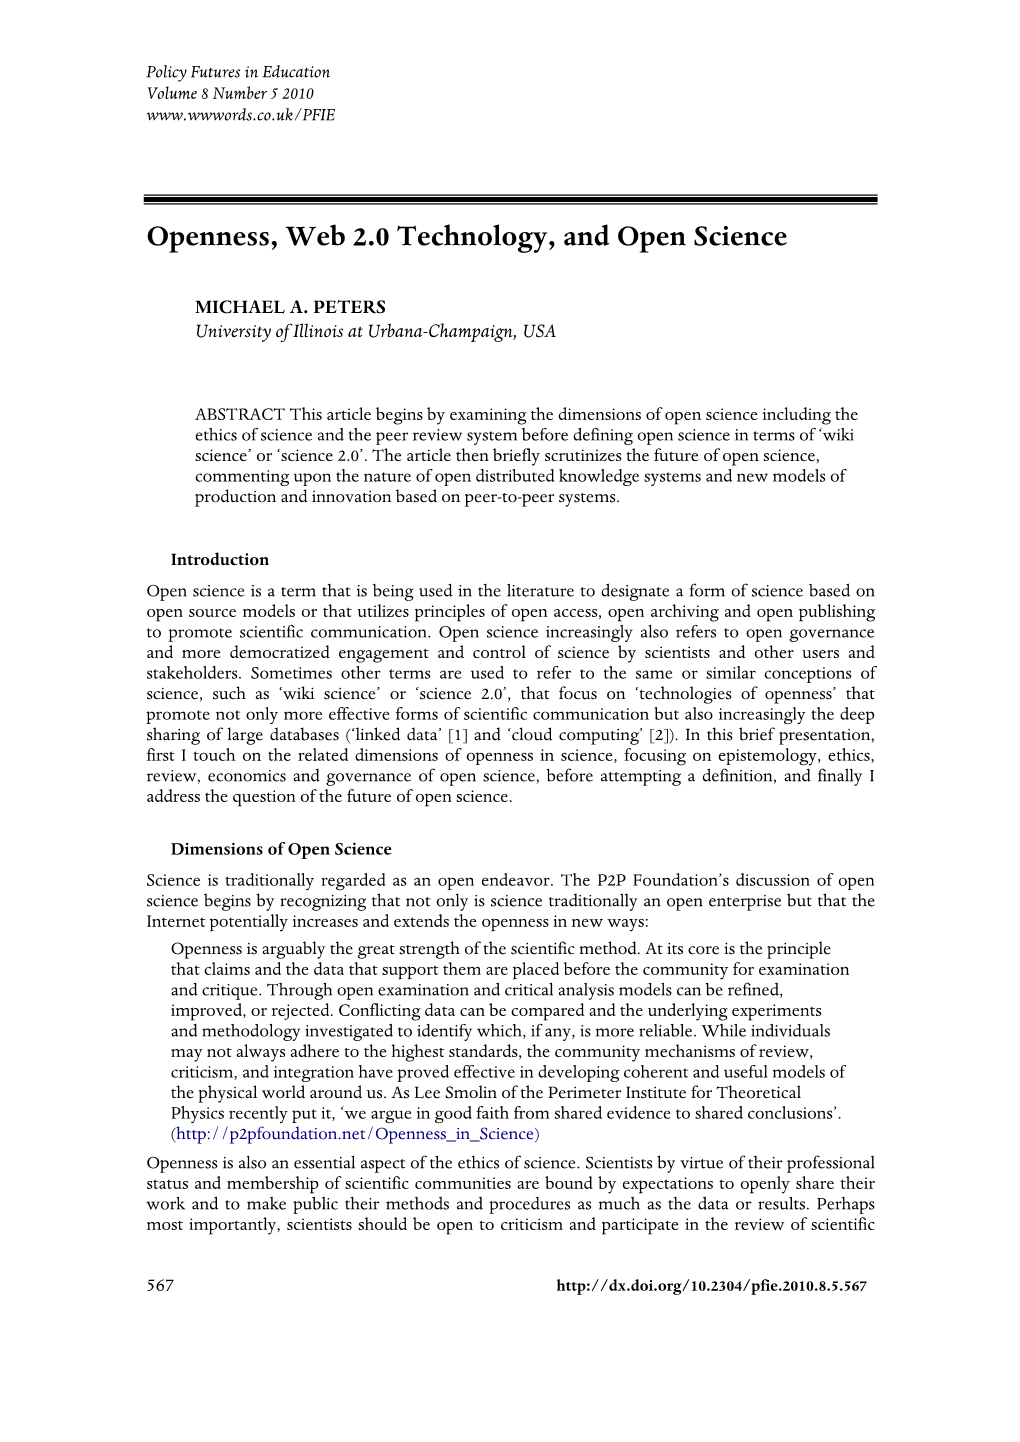 Openness, Web 2.0 Technology, and Open Science